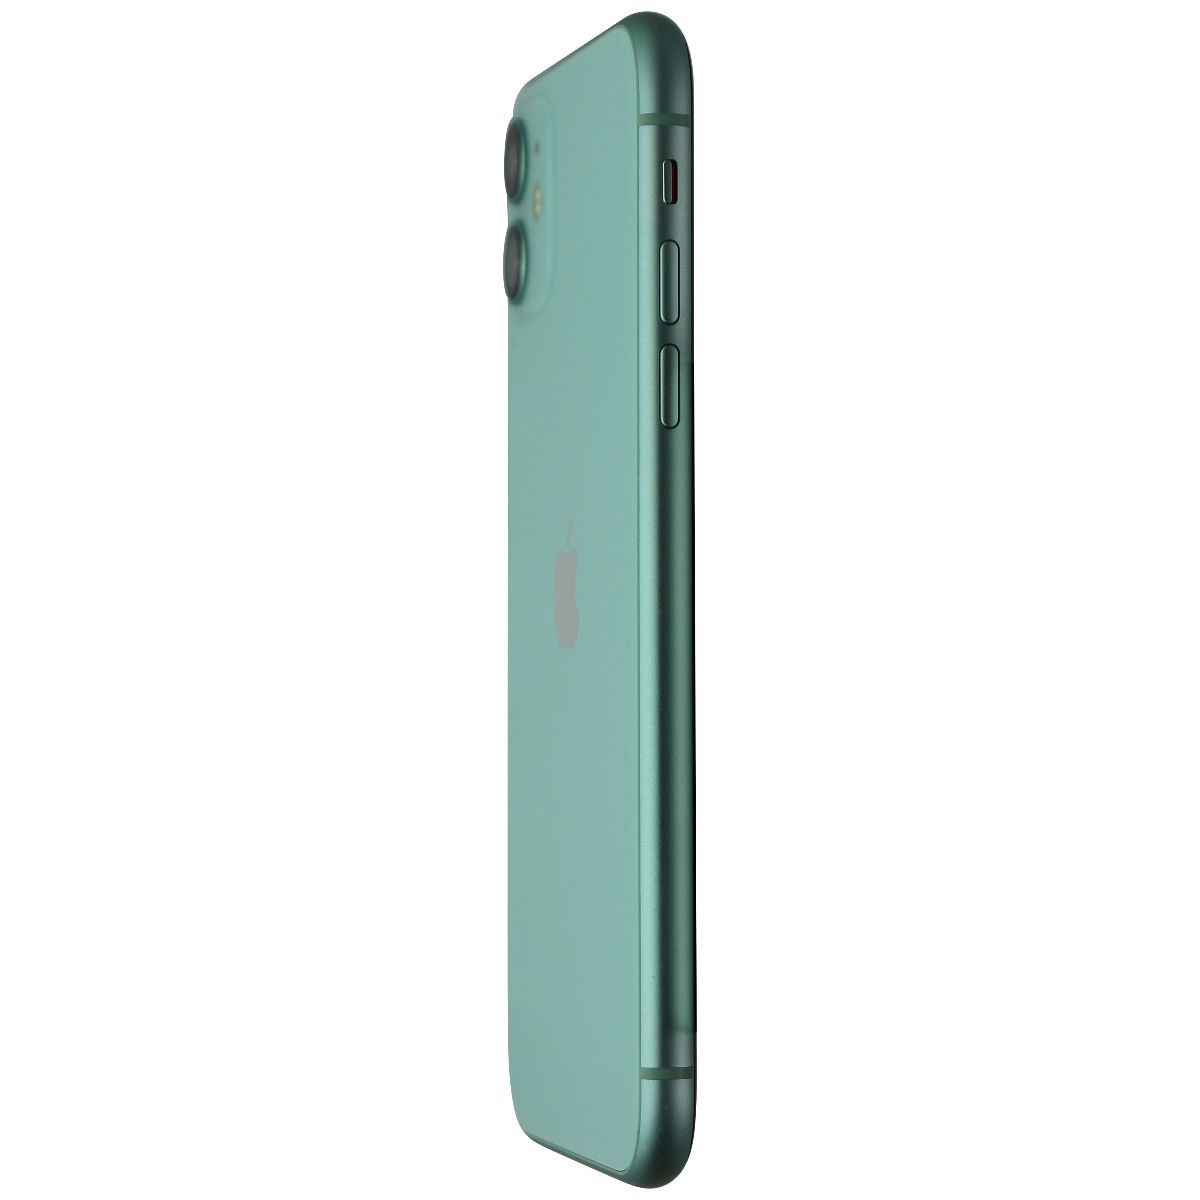 Apple iPhone 11 (6.1-in) (A2111) Unlocked - 64GB / Green - Bad Face ID* Cell Phones & Smartphones Apple    - Simple Cell Bulk Wholesale Pricing - USA Seller